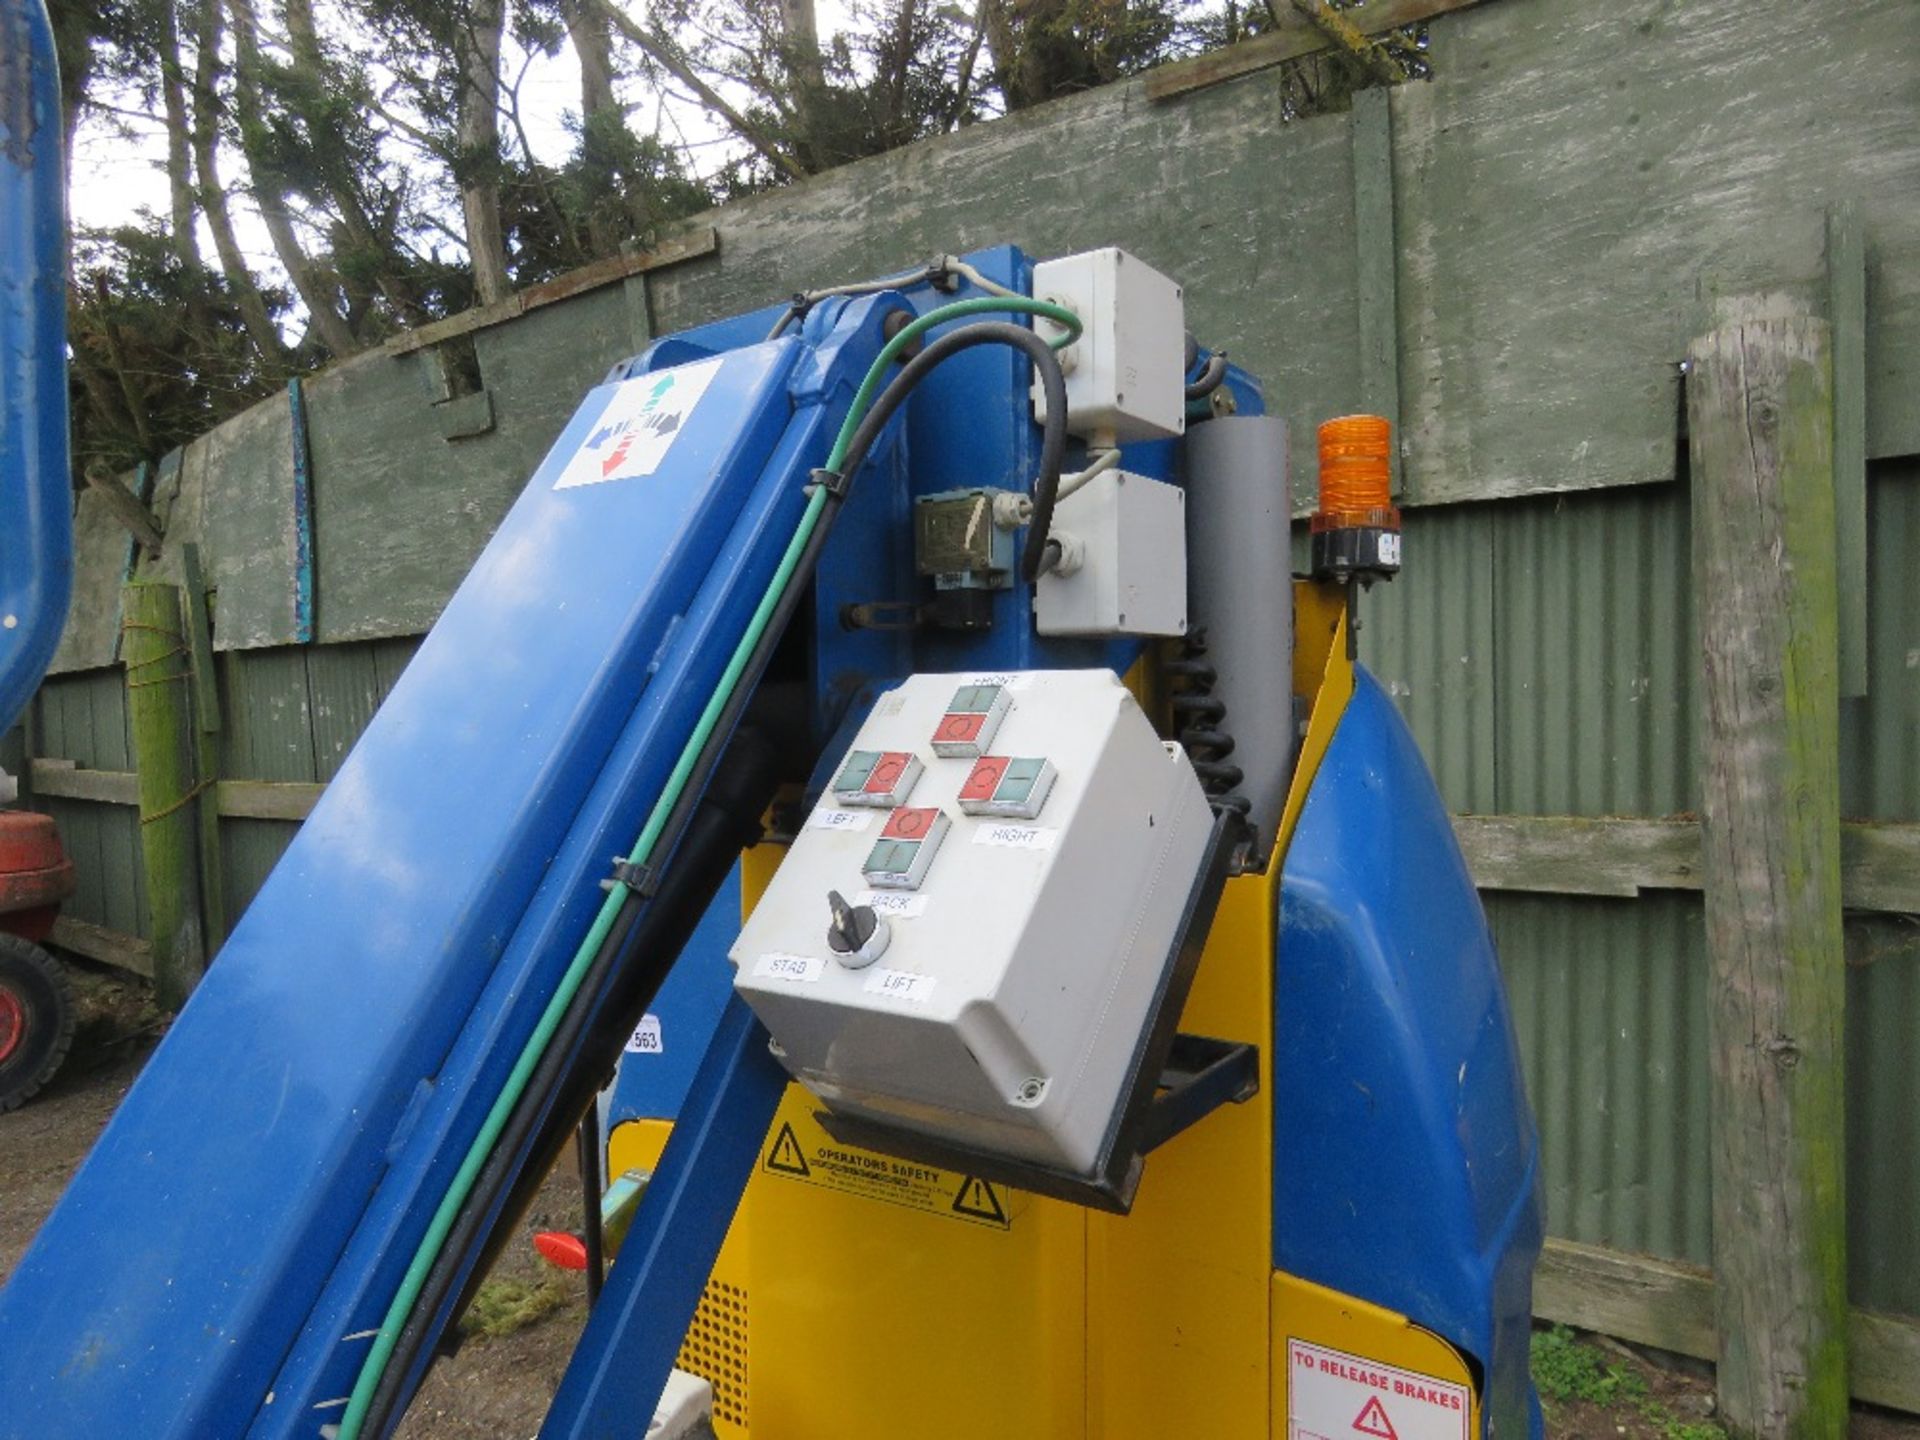 ABM ORION 1000 SELF PROPELLED 10 METRE MAST ACCESS LIFT UNIT WITH OUTRIGGERS YEAR 2001. SN:011006118 - Image 5 of 12